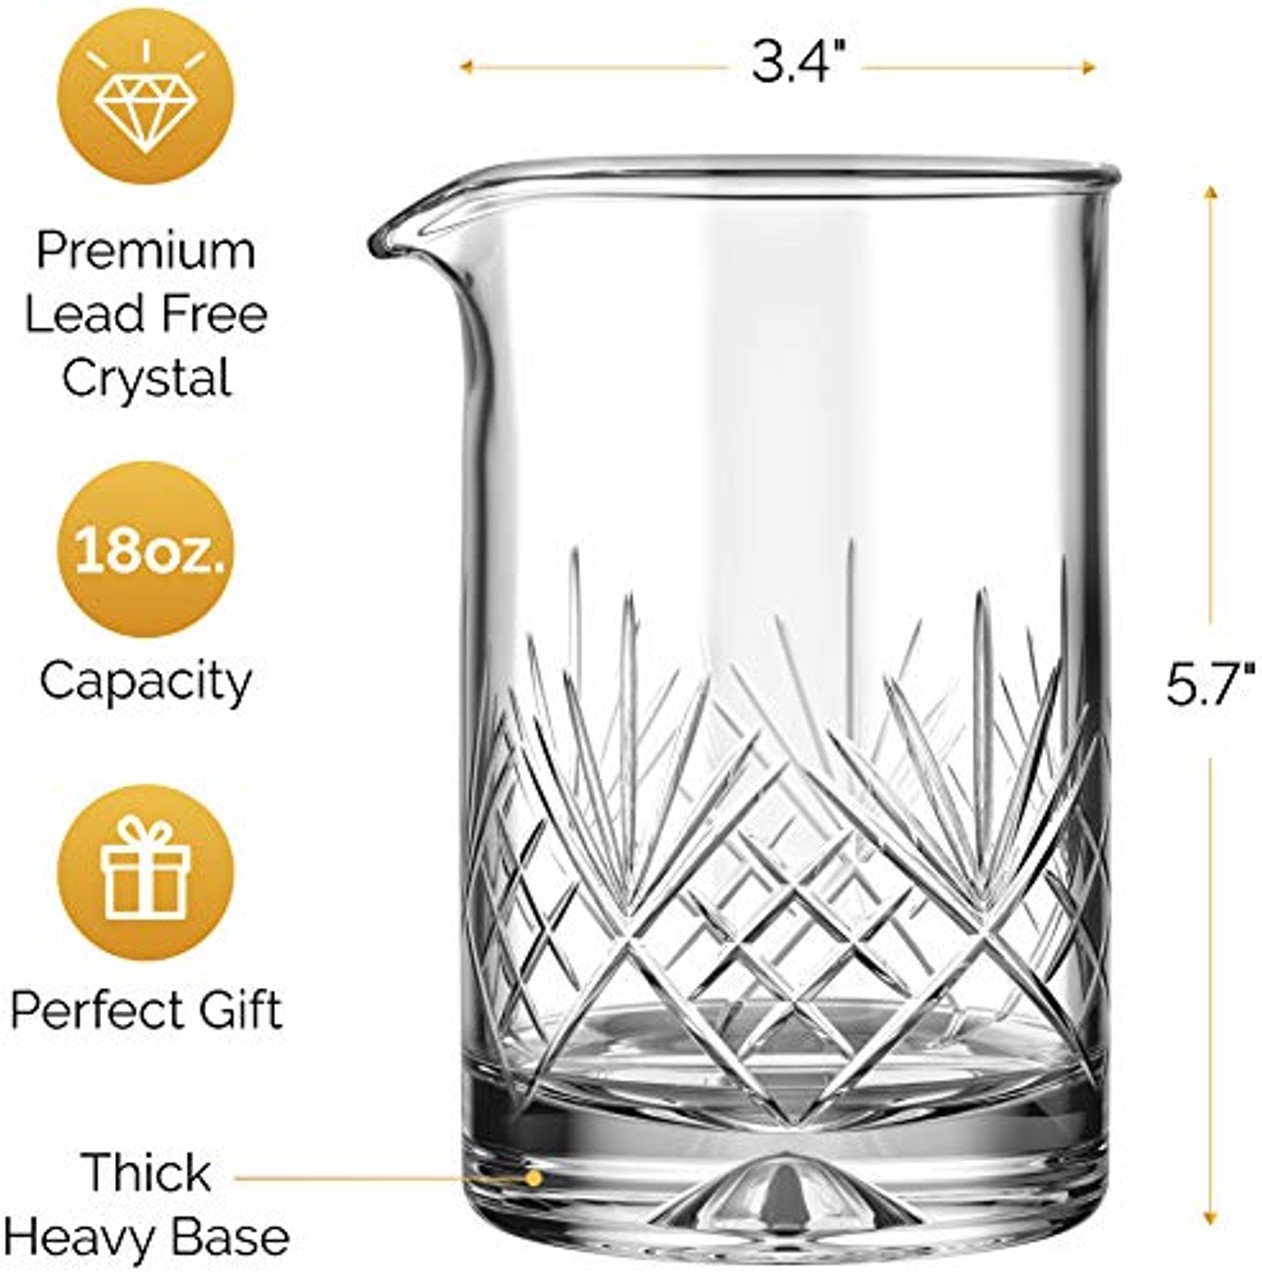 Seamless Mixing Glass, Barware, Bar Products, Glassware